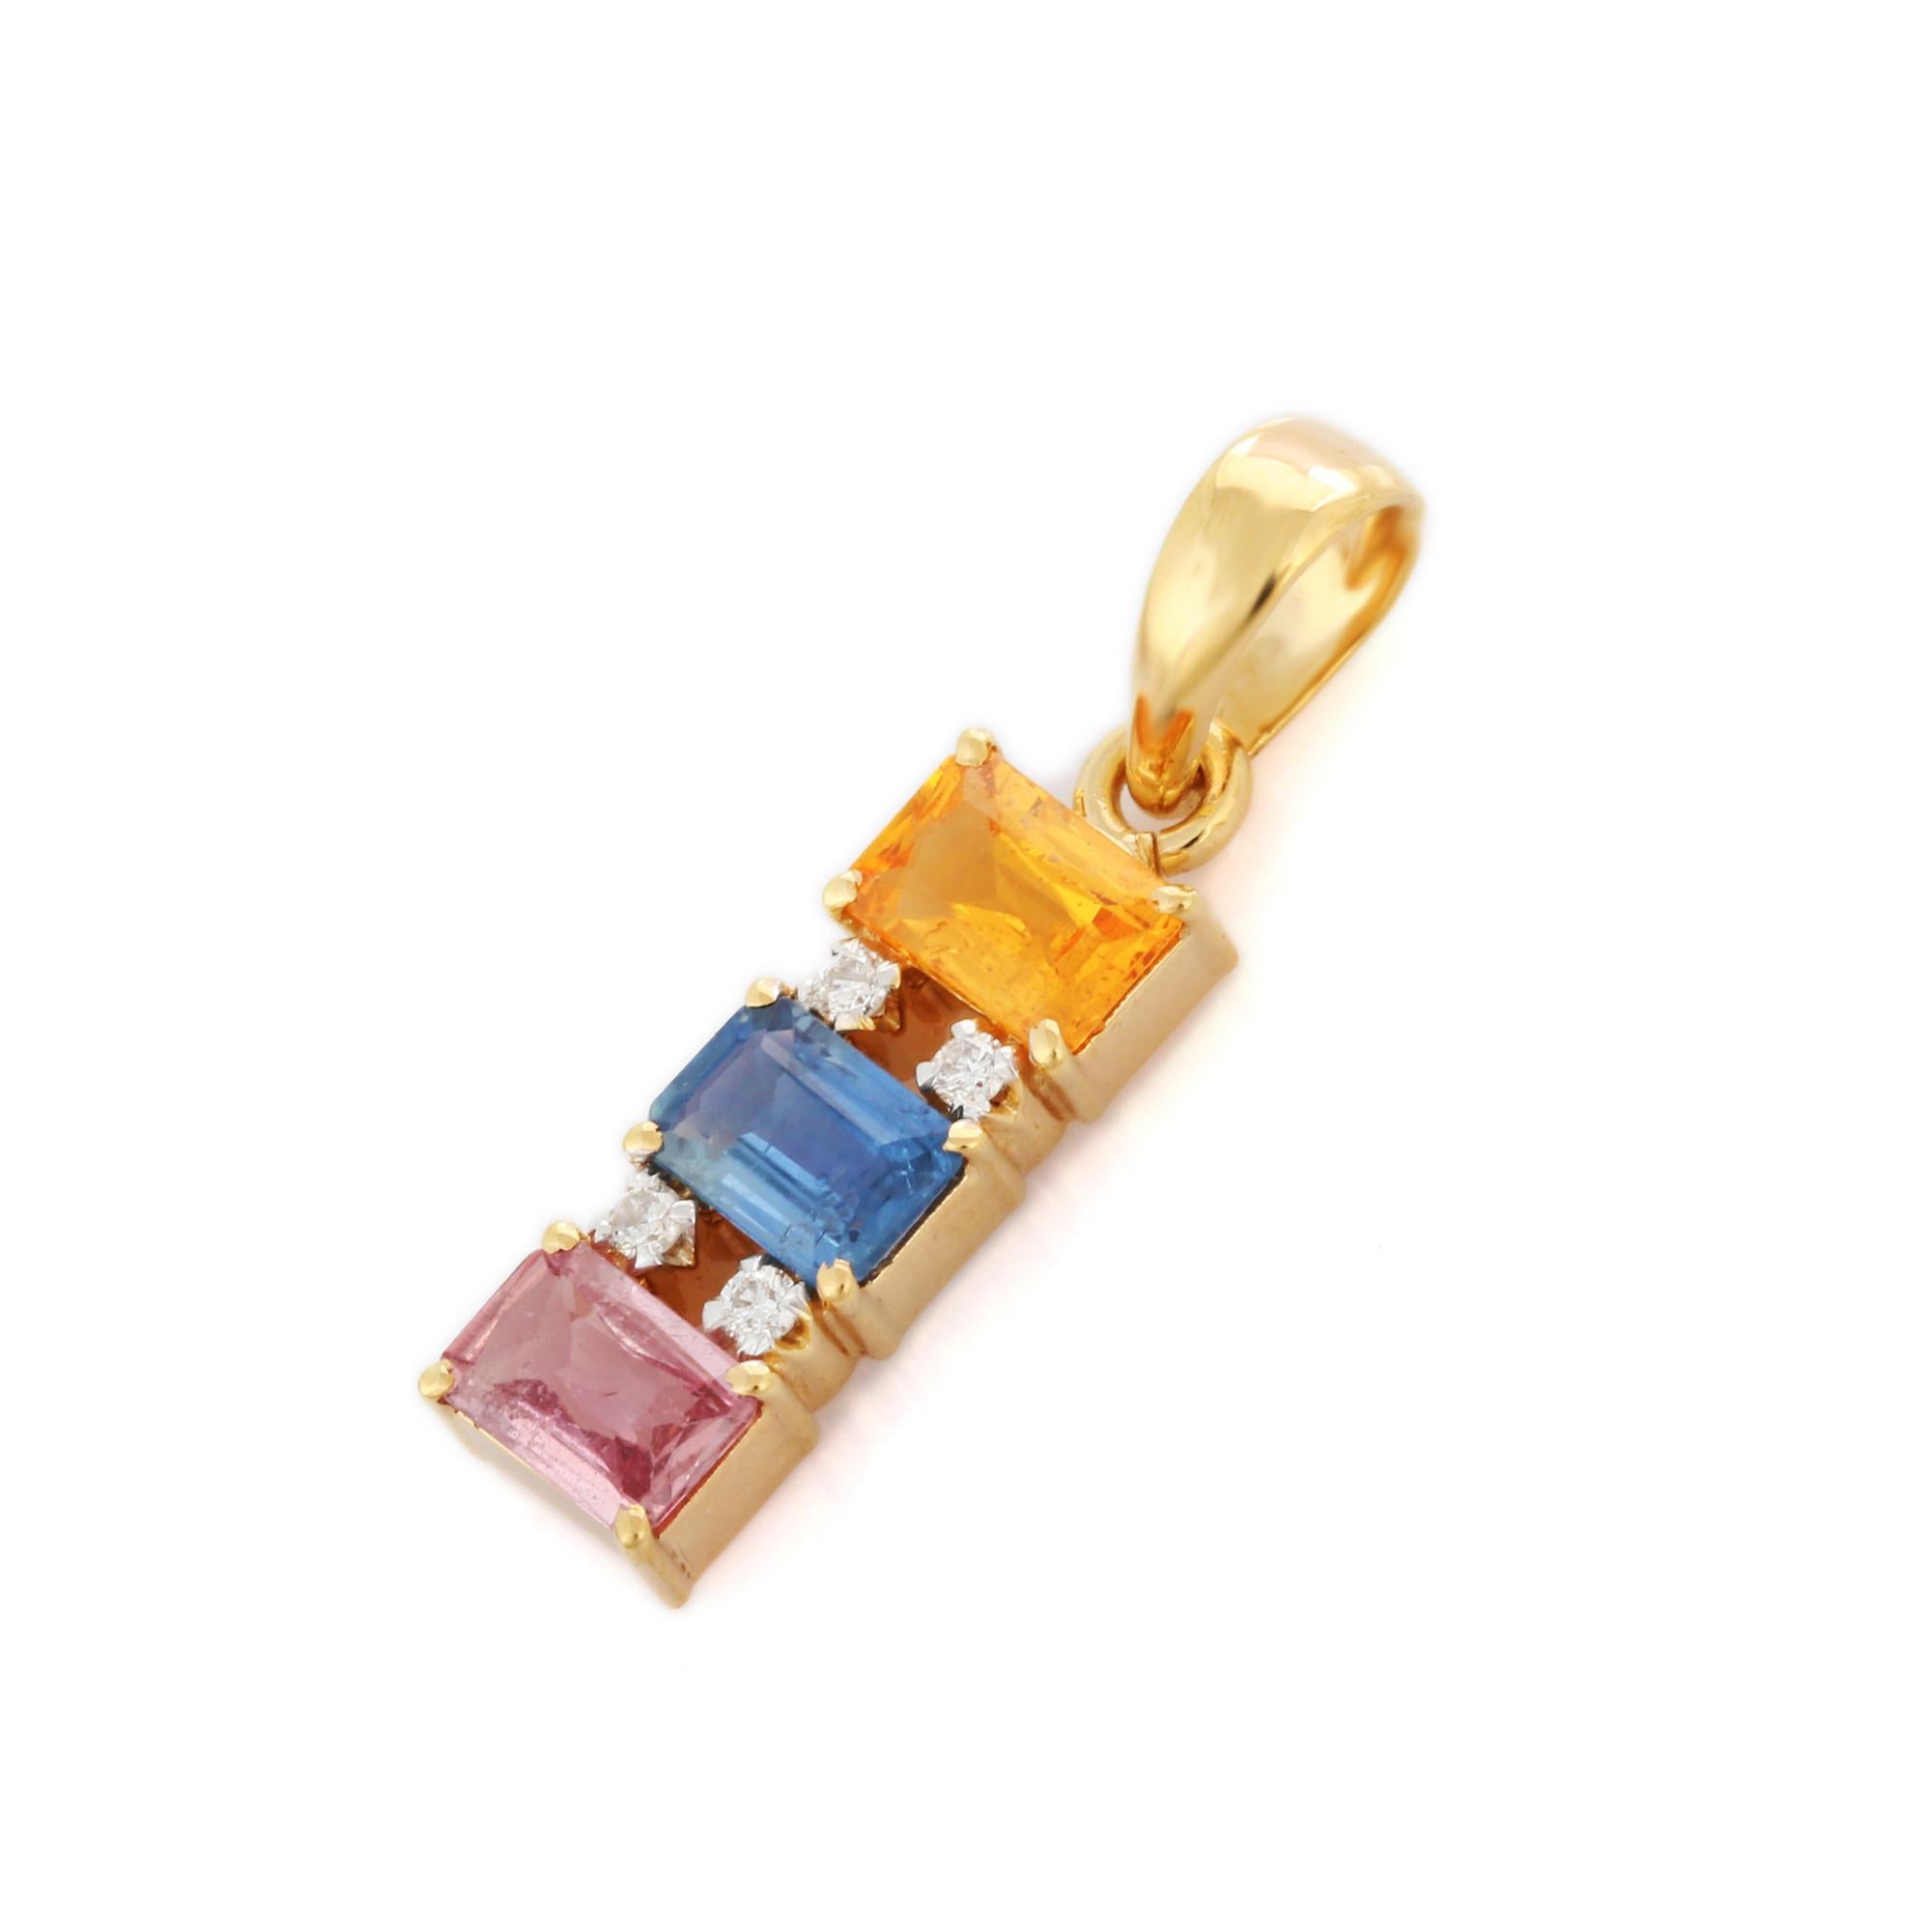 Impeccable 1.8 ct Multi Sapphire Pendant with Diamonds in 18K Yellow Gold In New Condition For Sale In Houston, TX